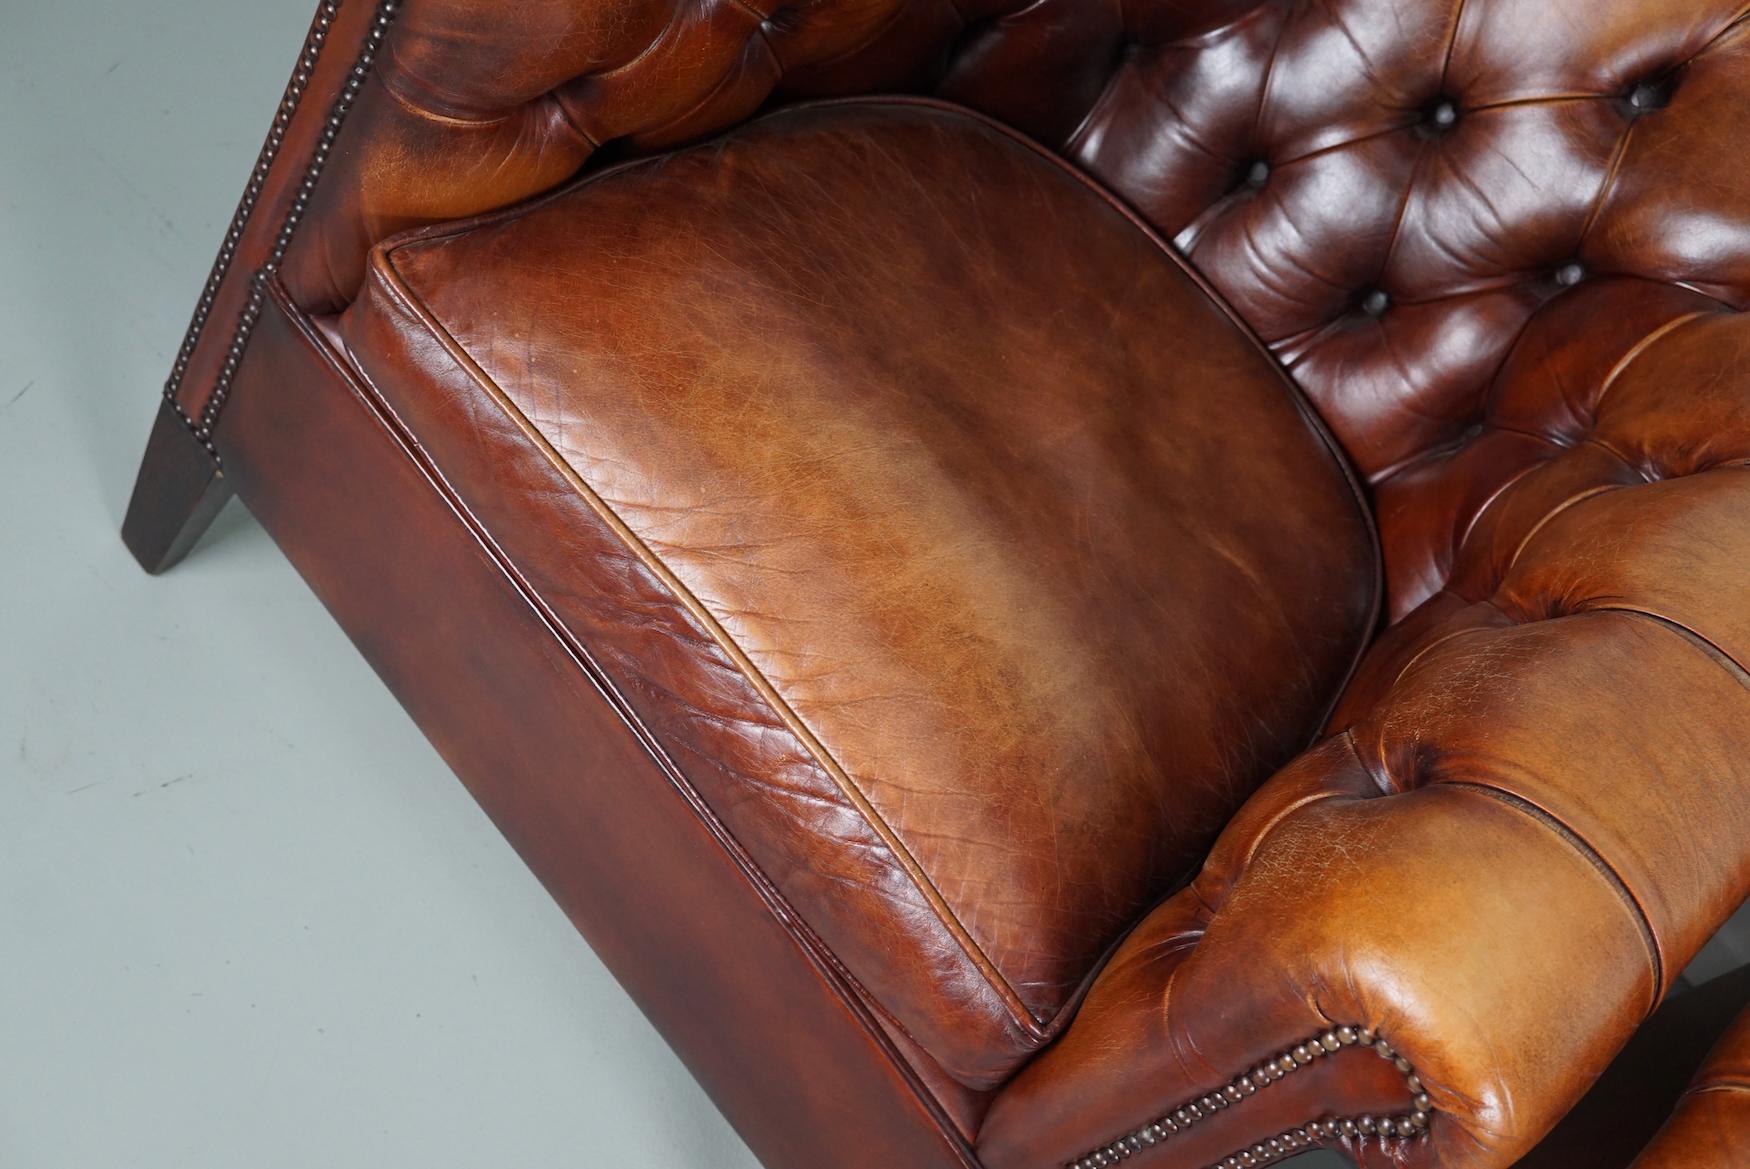 Vintage Dutch Chesterfield Cognac Leather Club Chairs, Set of 2 4